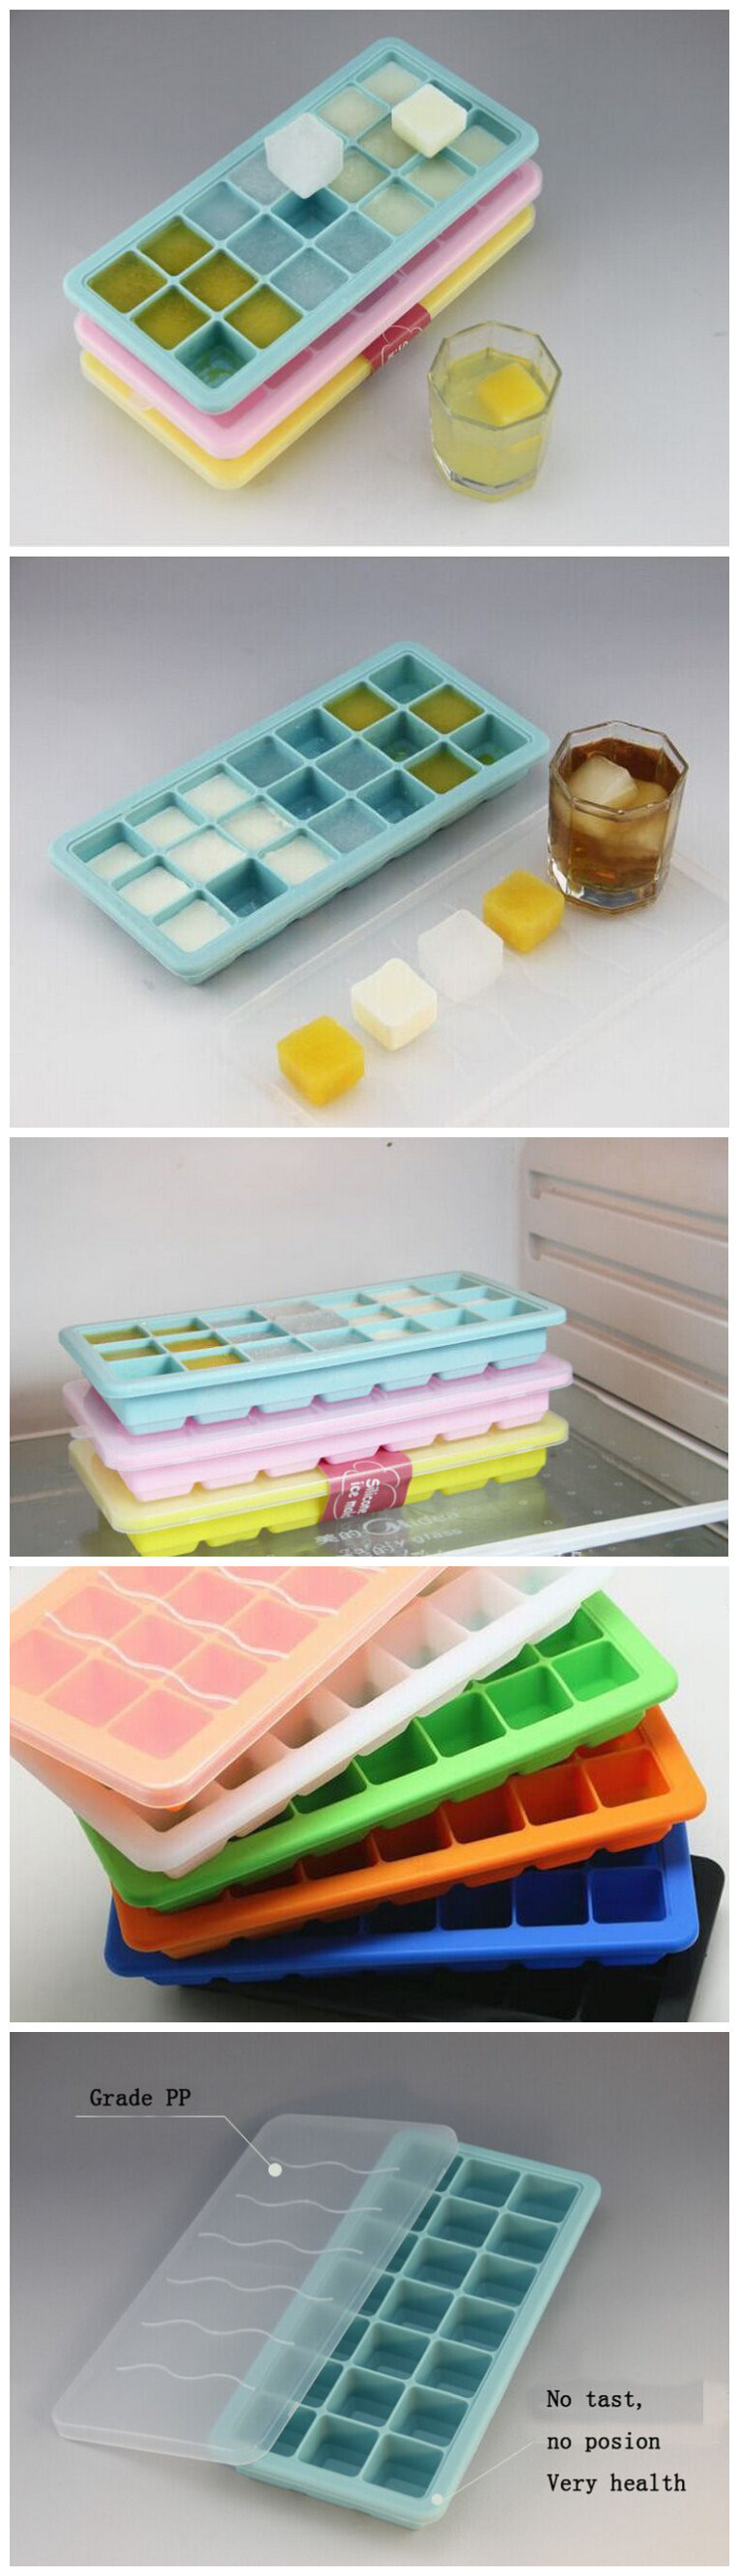 Dehuan Finger out Silicone Ice Molds Soft Ice Molds for Tough Ice